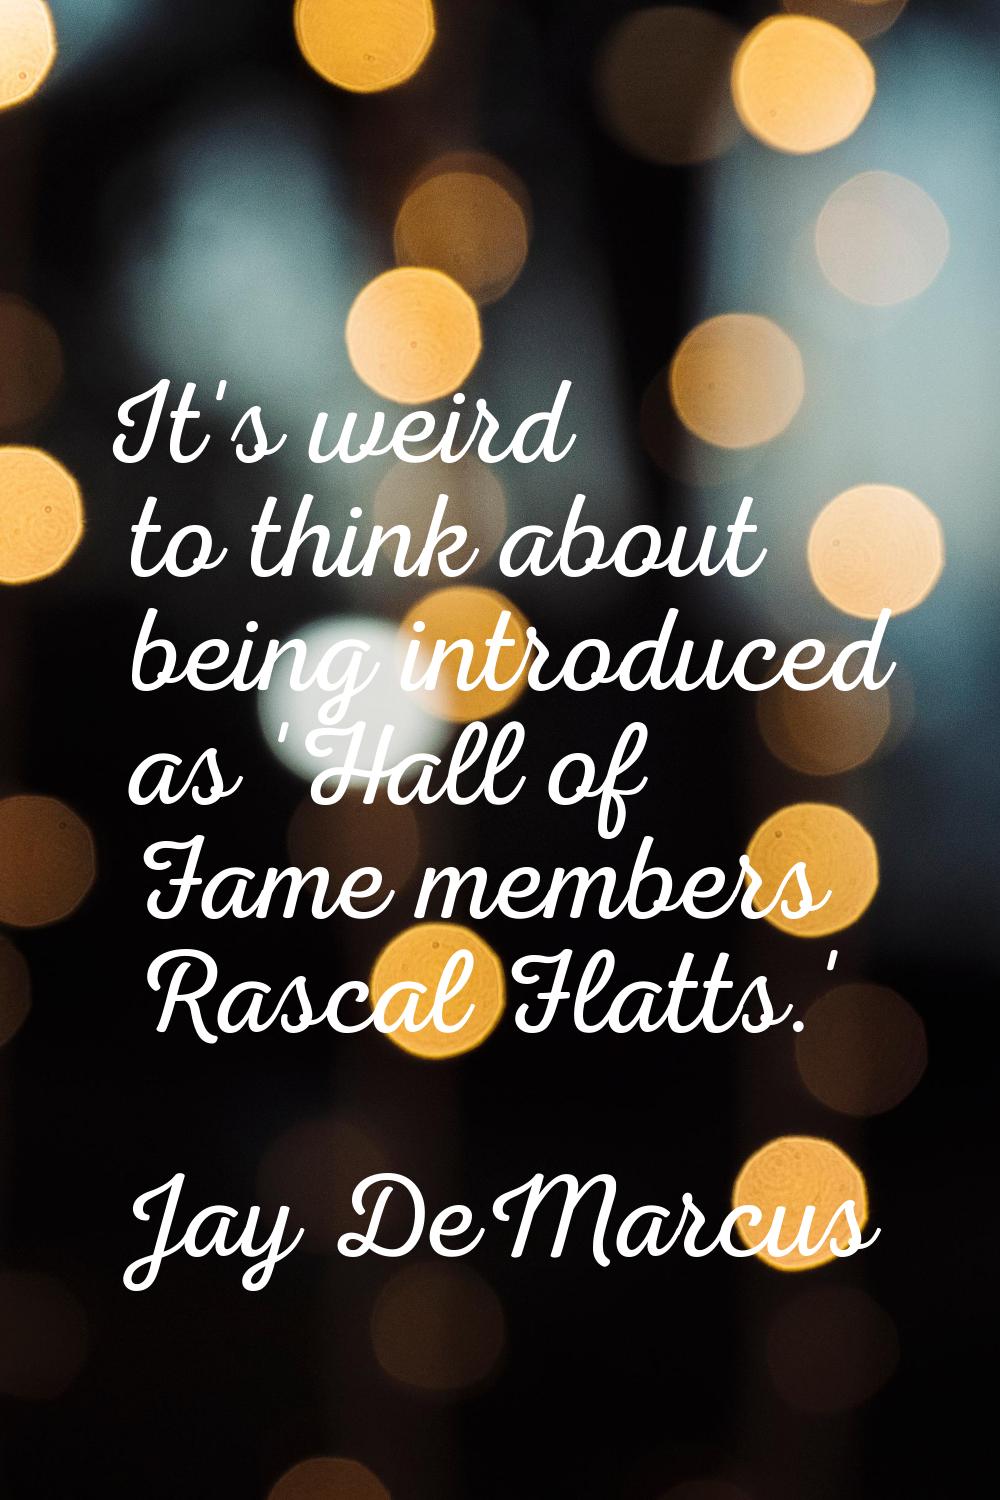 It's weird to think about being introduced as 'Hall of Fame members Rascal Flatts.'